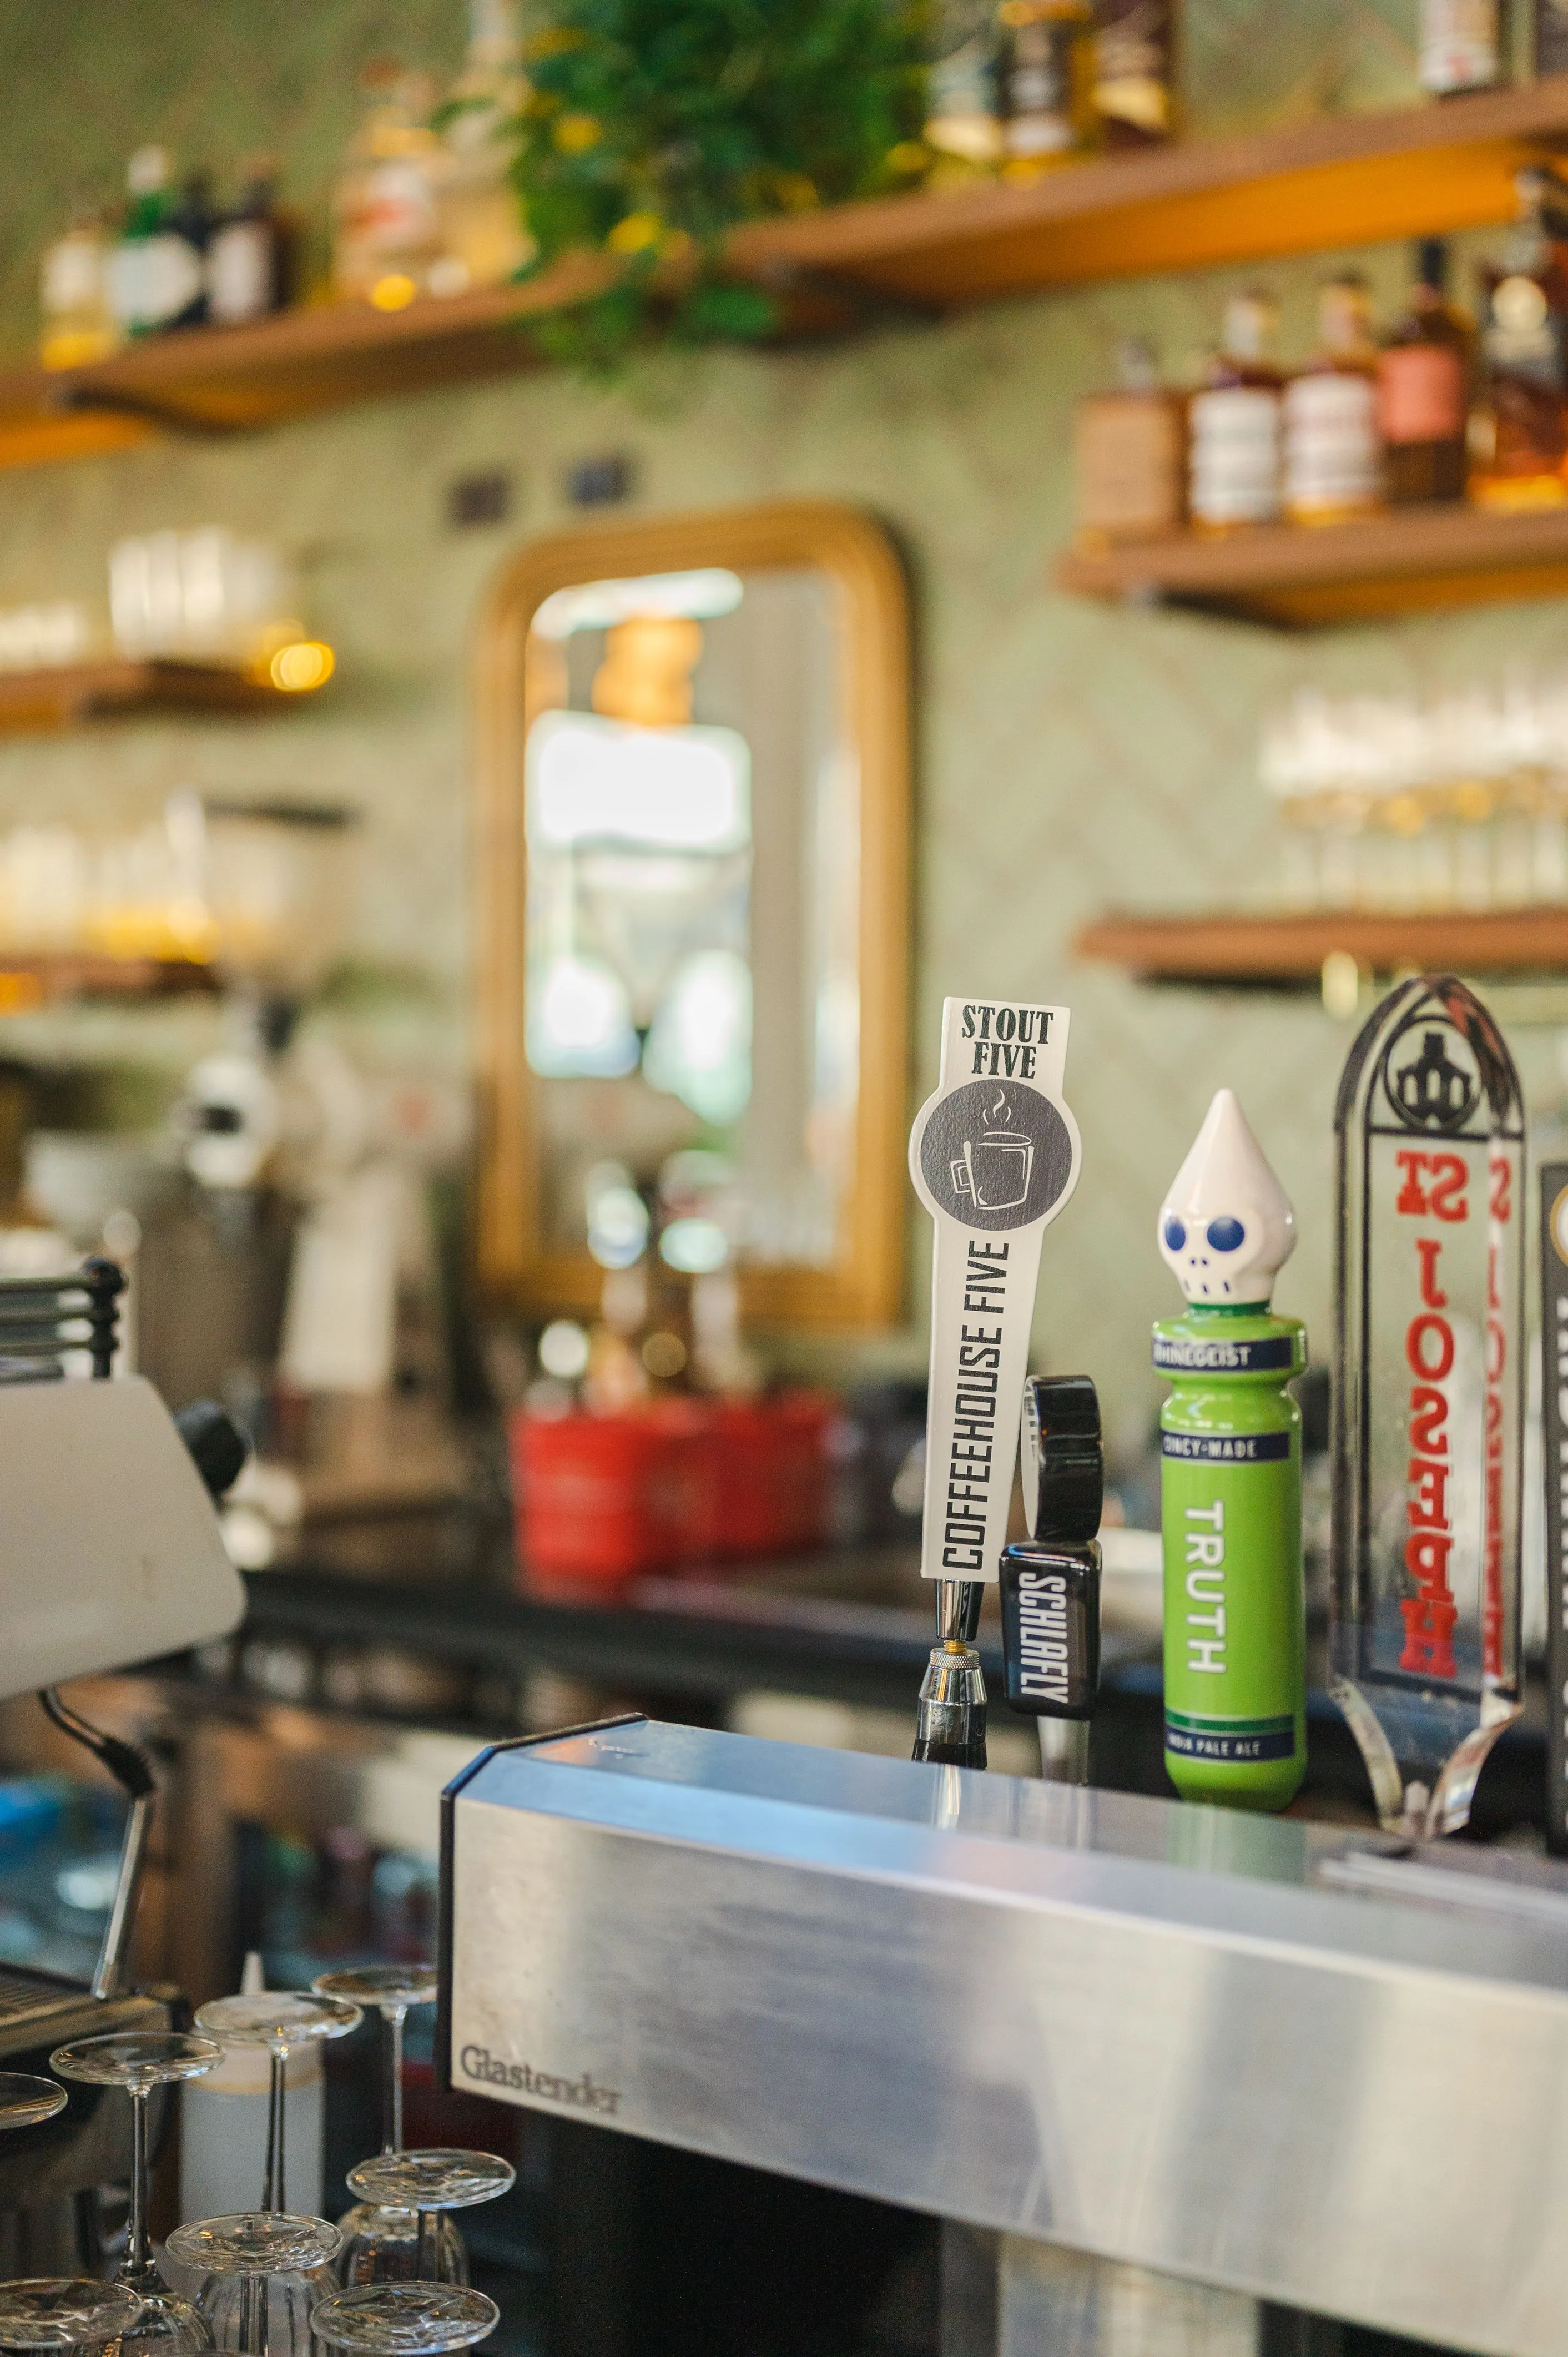 A cozy cafe bar featuring a series of tap handles, including a stylized stout dispenser, with a blurred background highlighting cafe shelves, a mirror, and warm lighting.